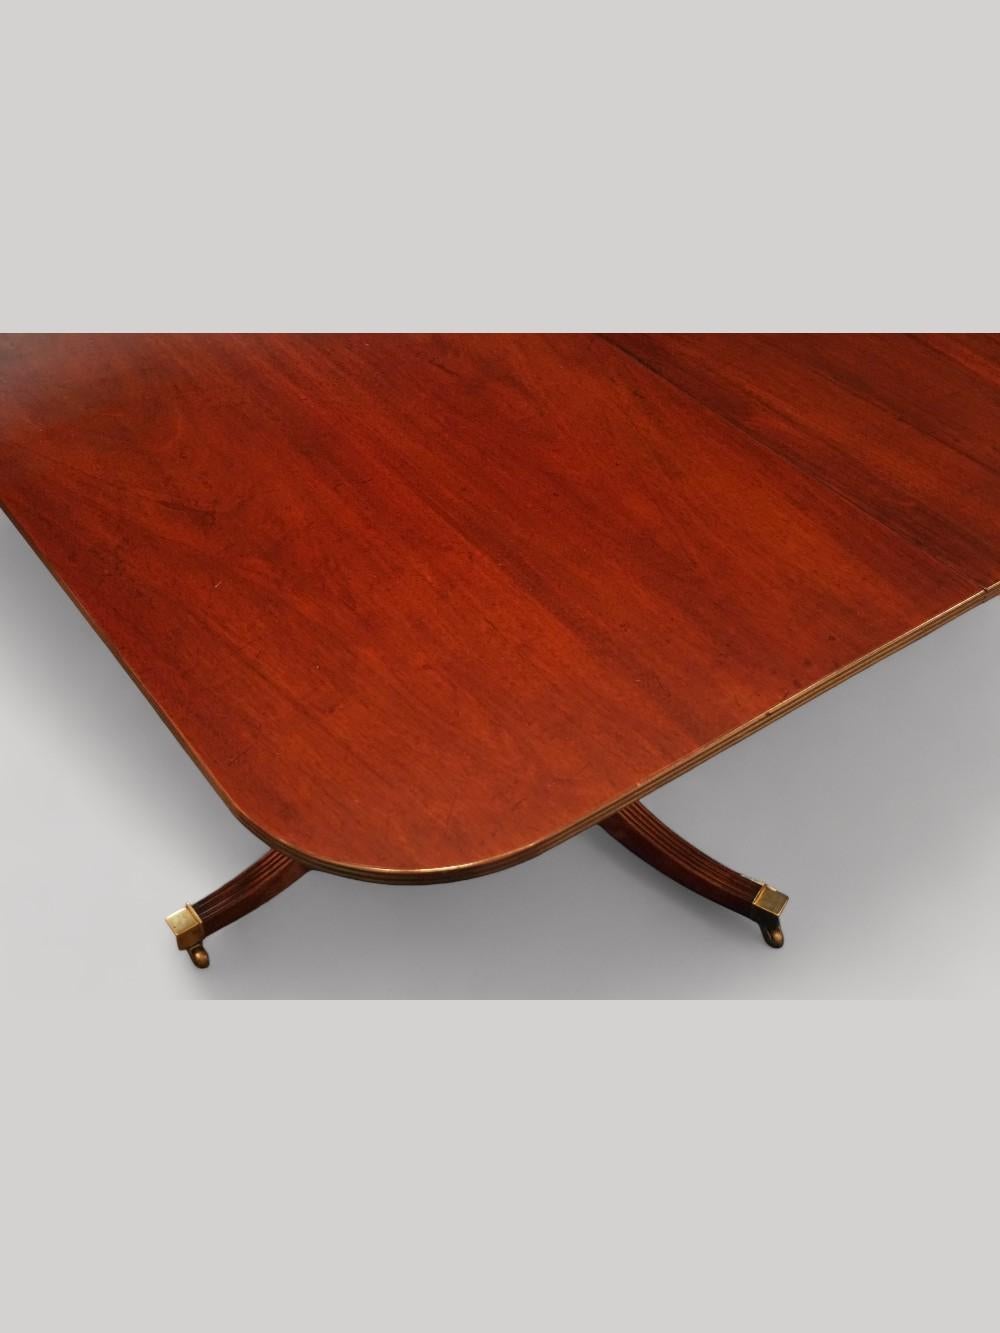 George V mahogany pedestal dining table
This George V mahogany pedestal dining table was made circa 1930 in a top workshop.
It is in the high-Georgian style that has been popular for 250 years.
These dining tables are fantastic as you can get so